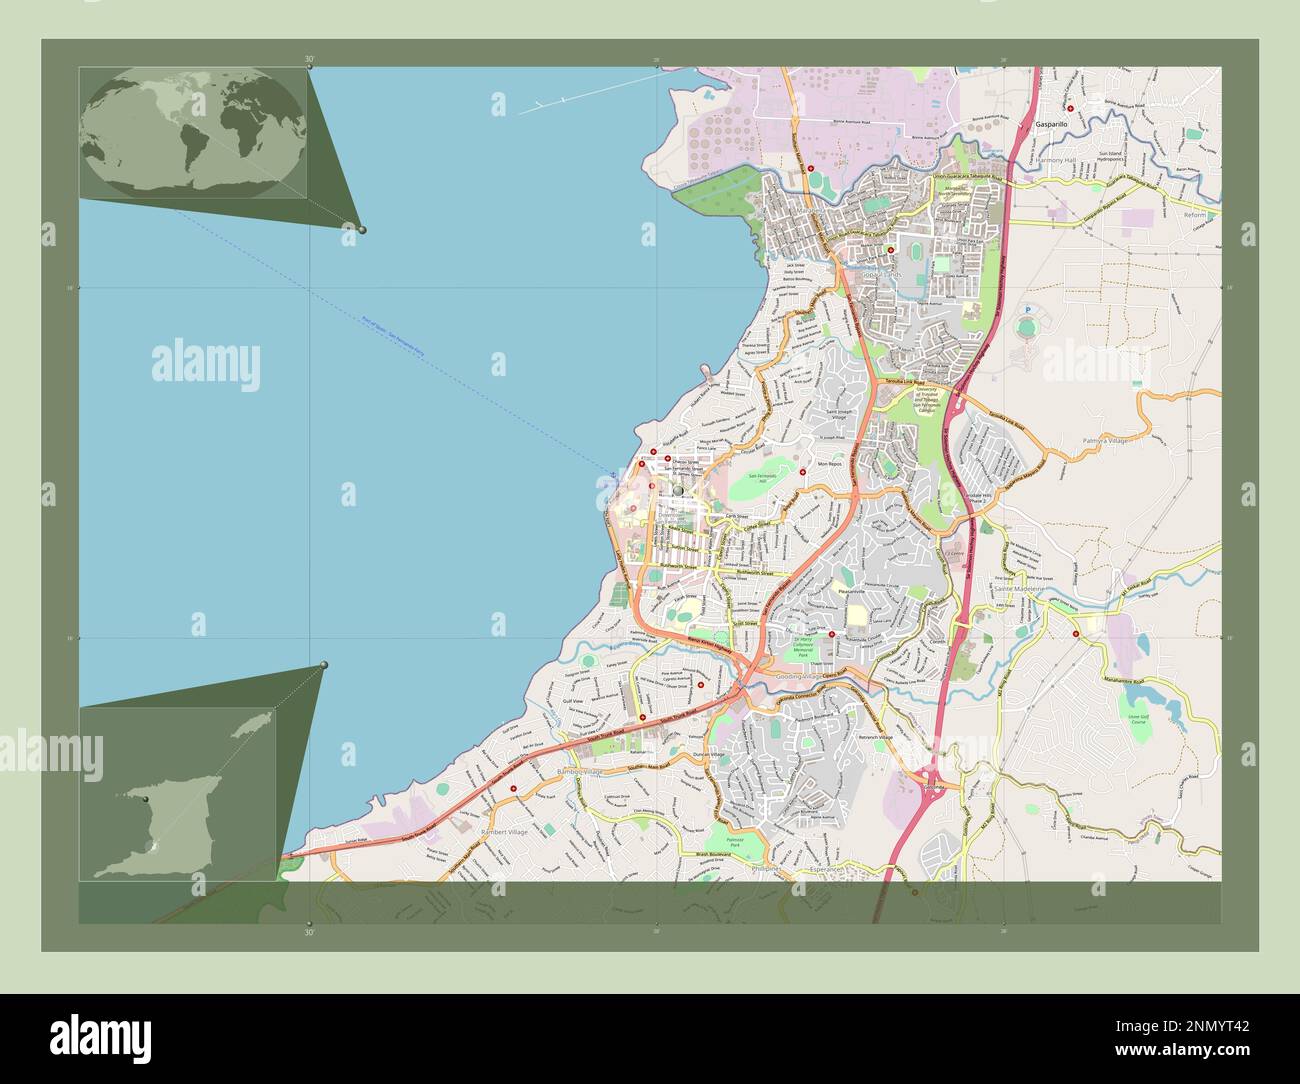 San Fernando, city of Trinidad and Tobago. Open Street Map. Locations of major cities of the region. Corner auxiliary location maps Stock Photo